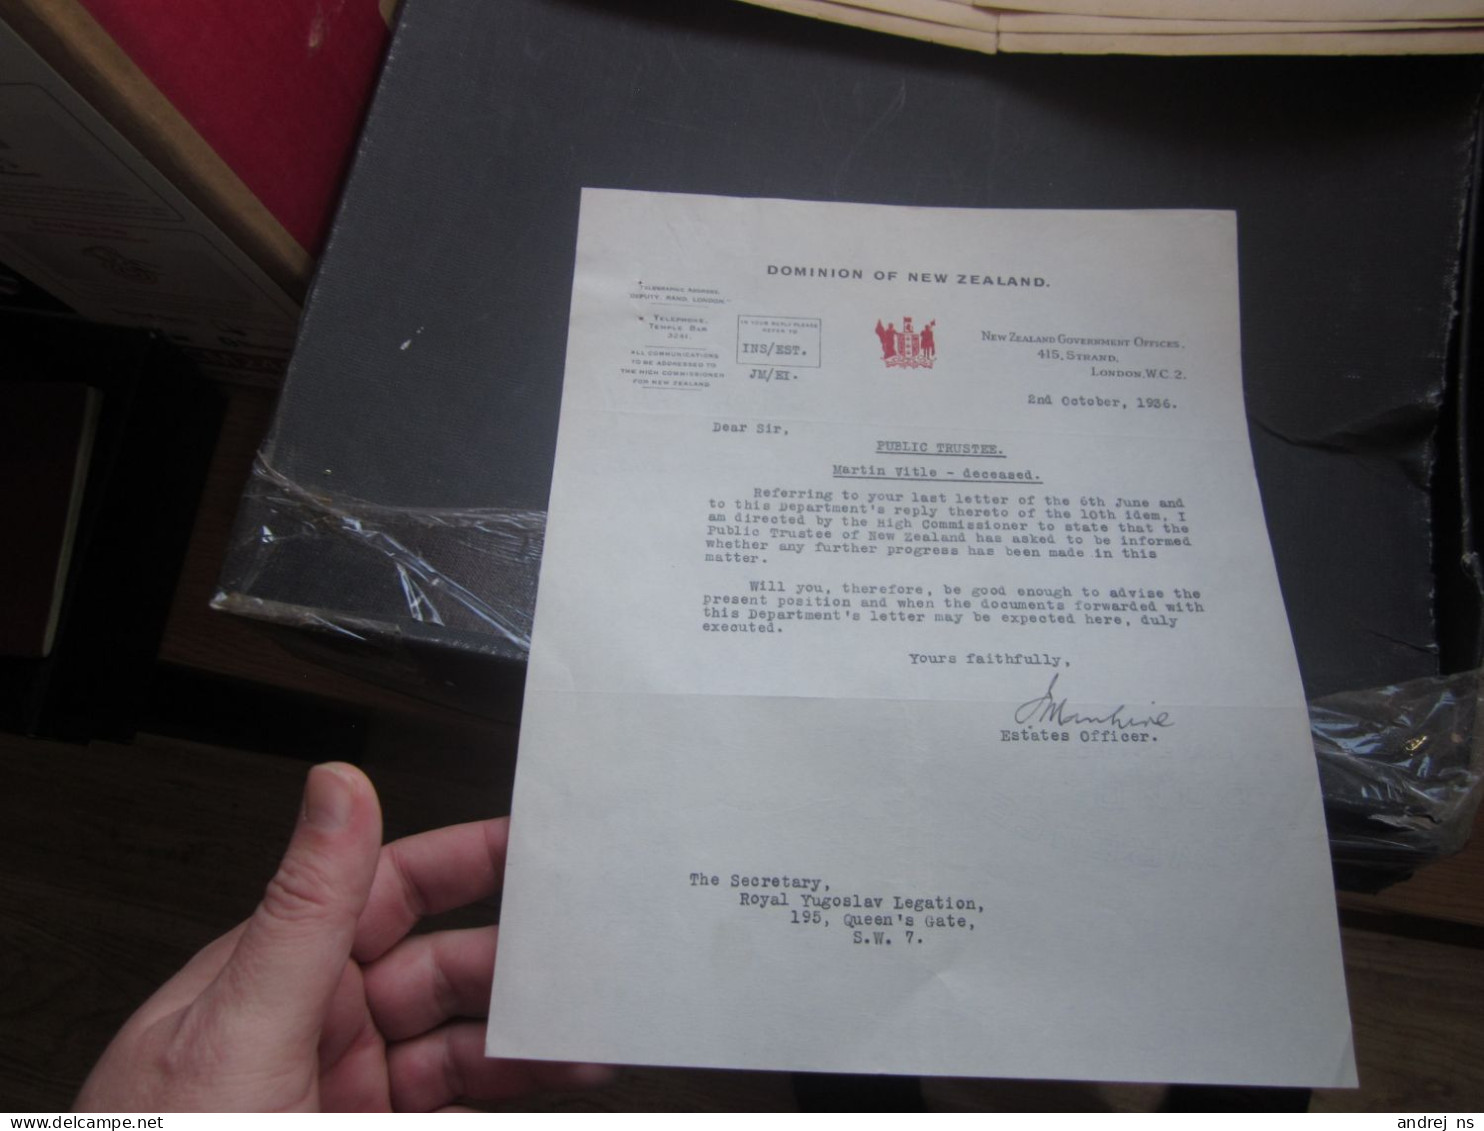 Dominion Of New Zealand 1936 Estates Officer Signatures  New Zealand Governments Offices London - Regno Unito